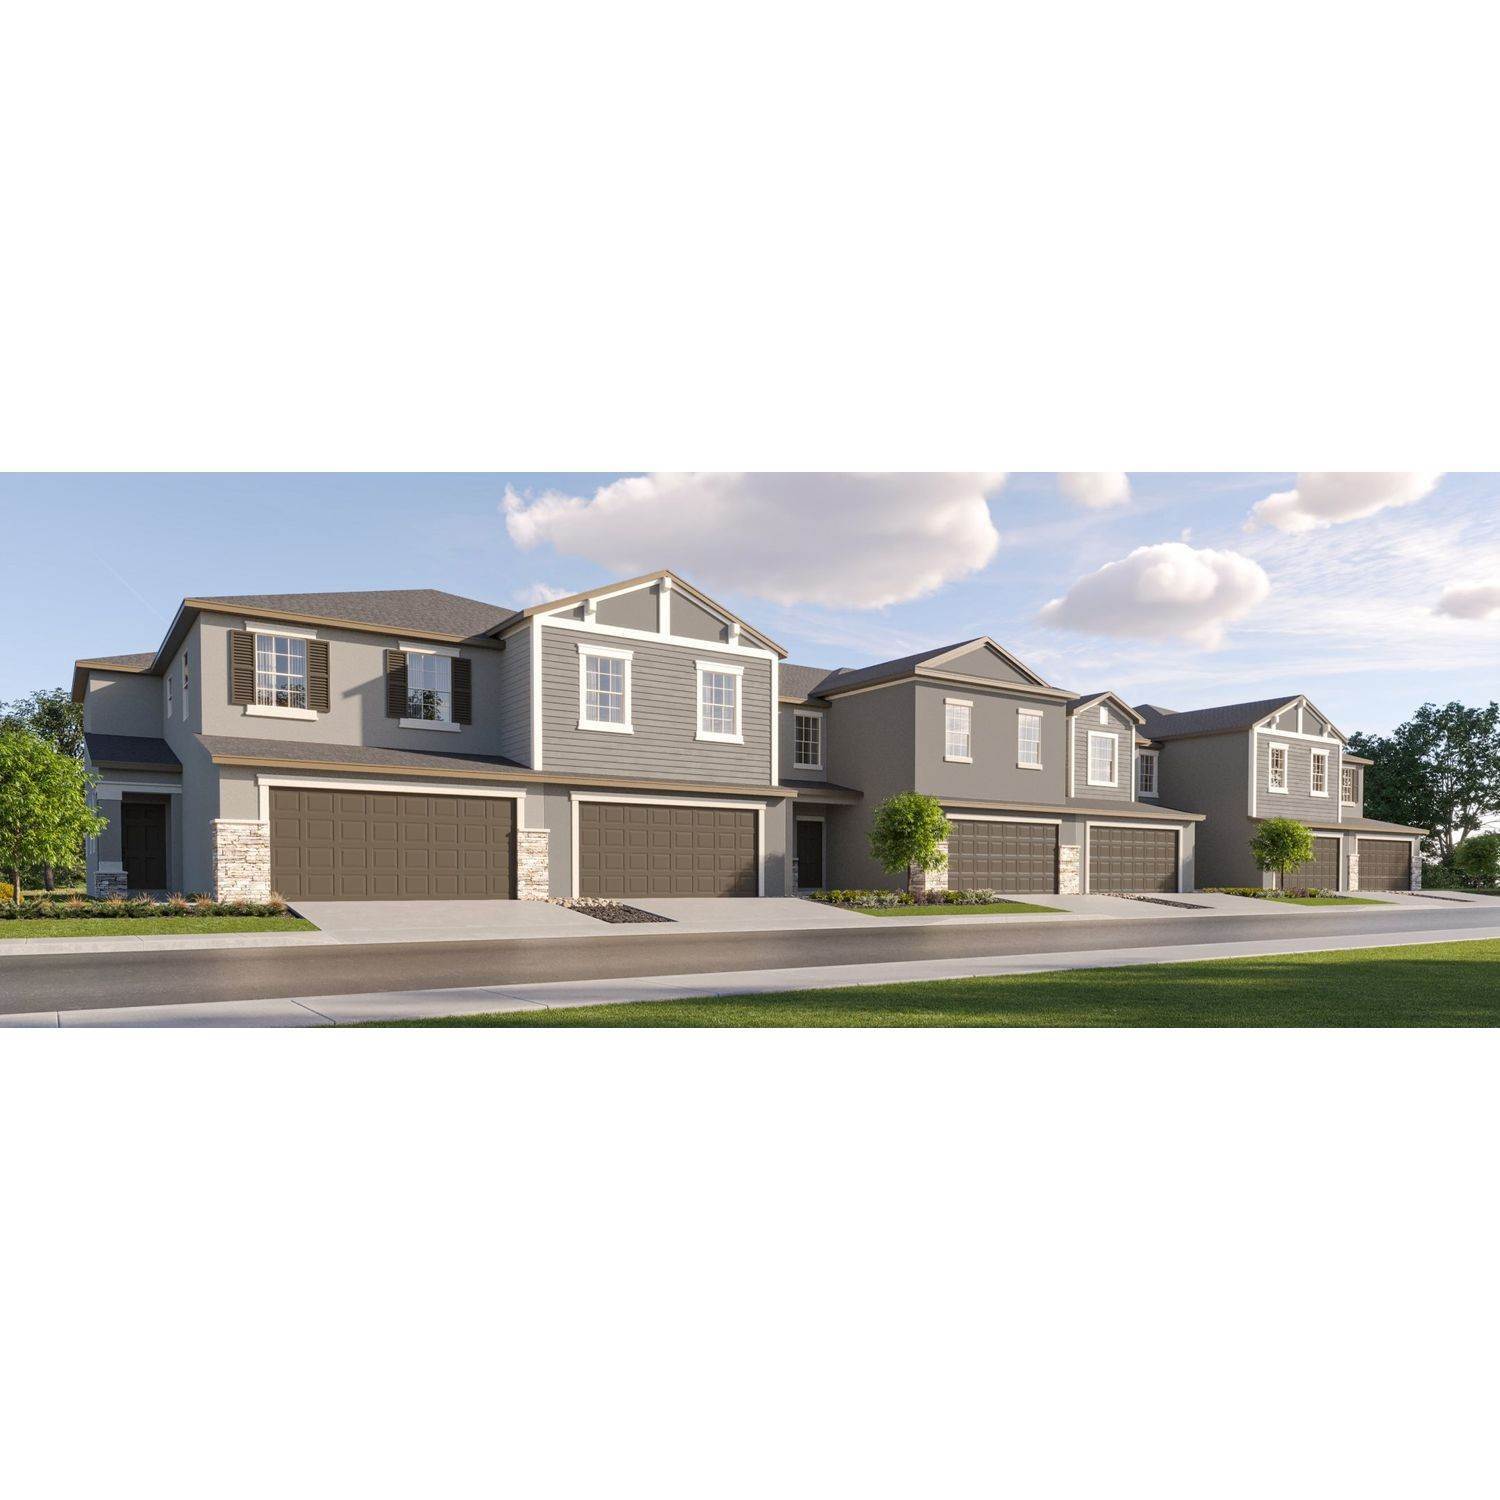 Angeline - The Townhomes gebouw op 17516 Nectar Flume Drive, Land O' Lakes, FL 34638